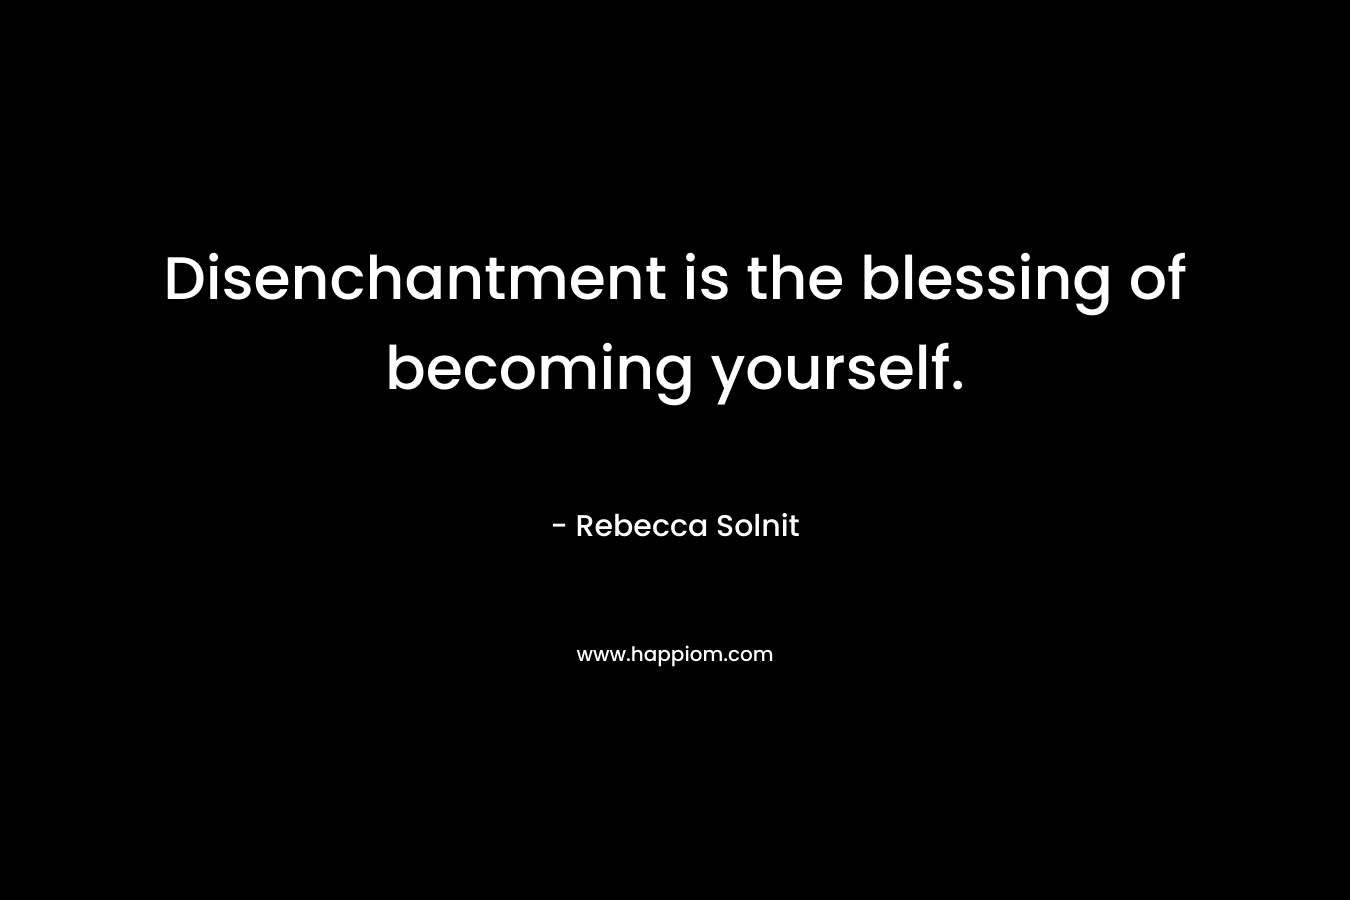 Disenchantment is the blessing of becoming yourself.